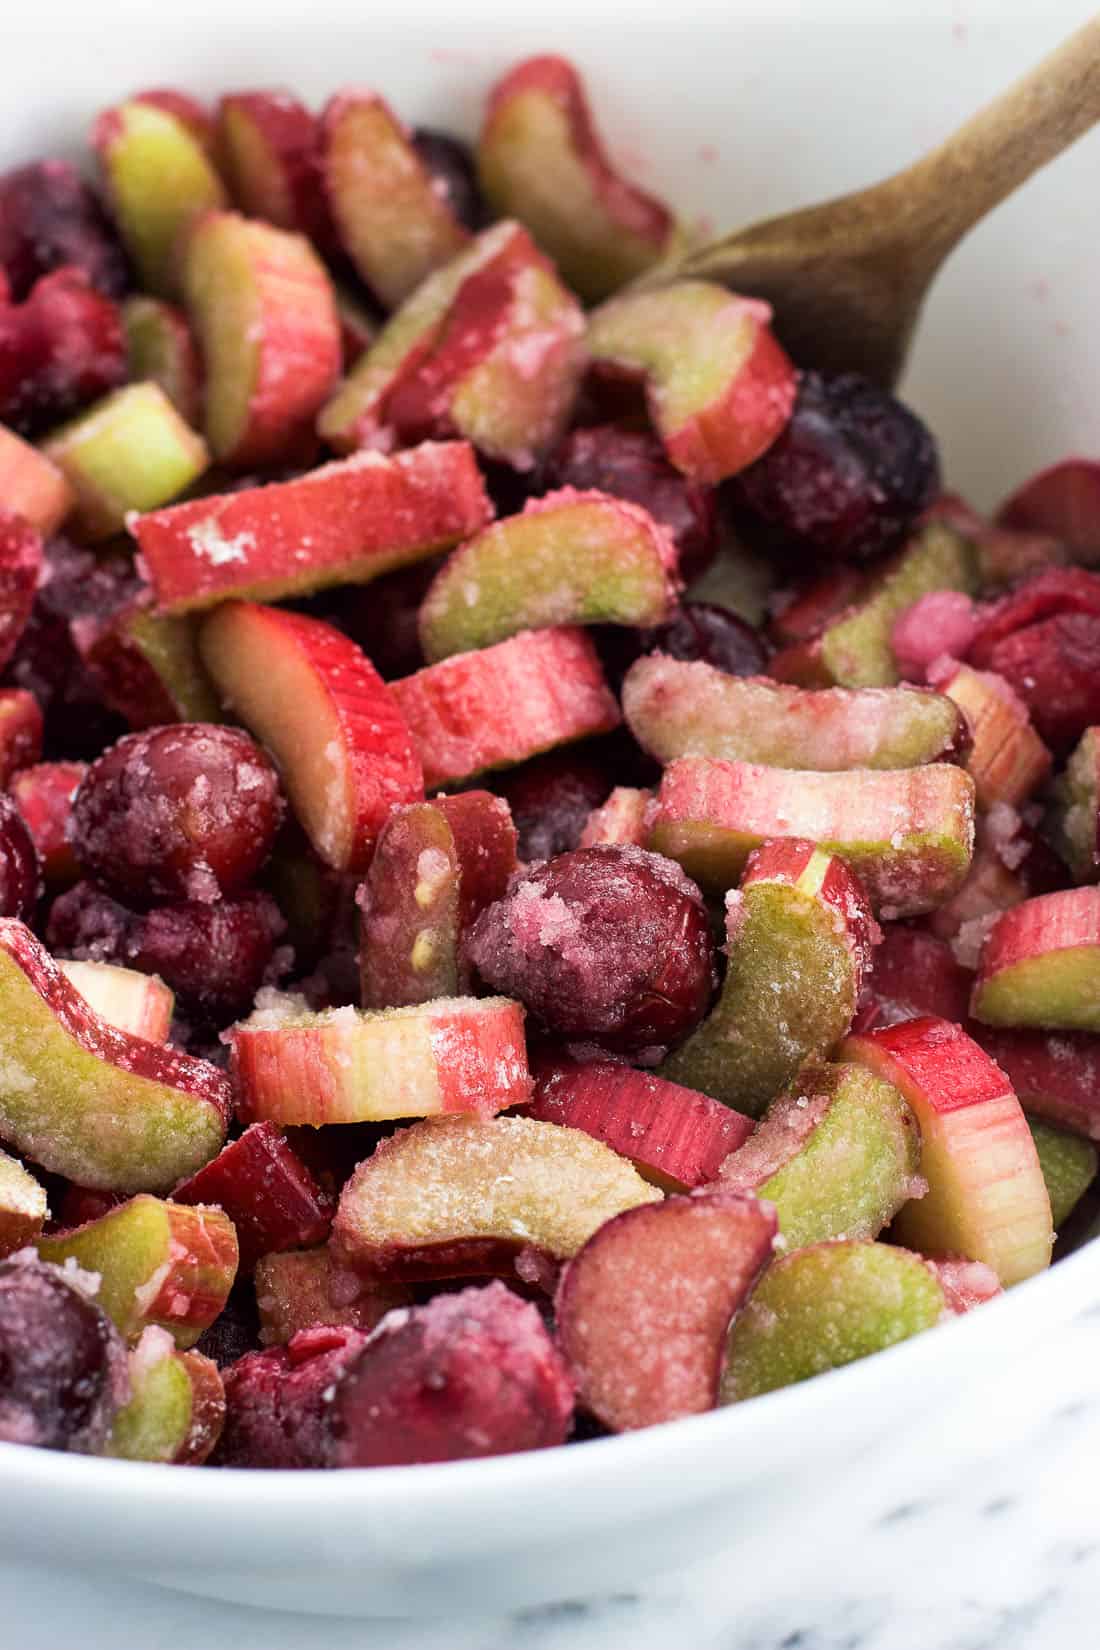 Sliced rhubarb and cherries covered in a sugar mixture in a mixing bowl